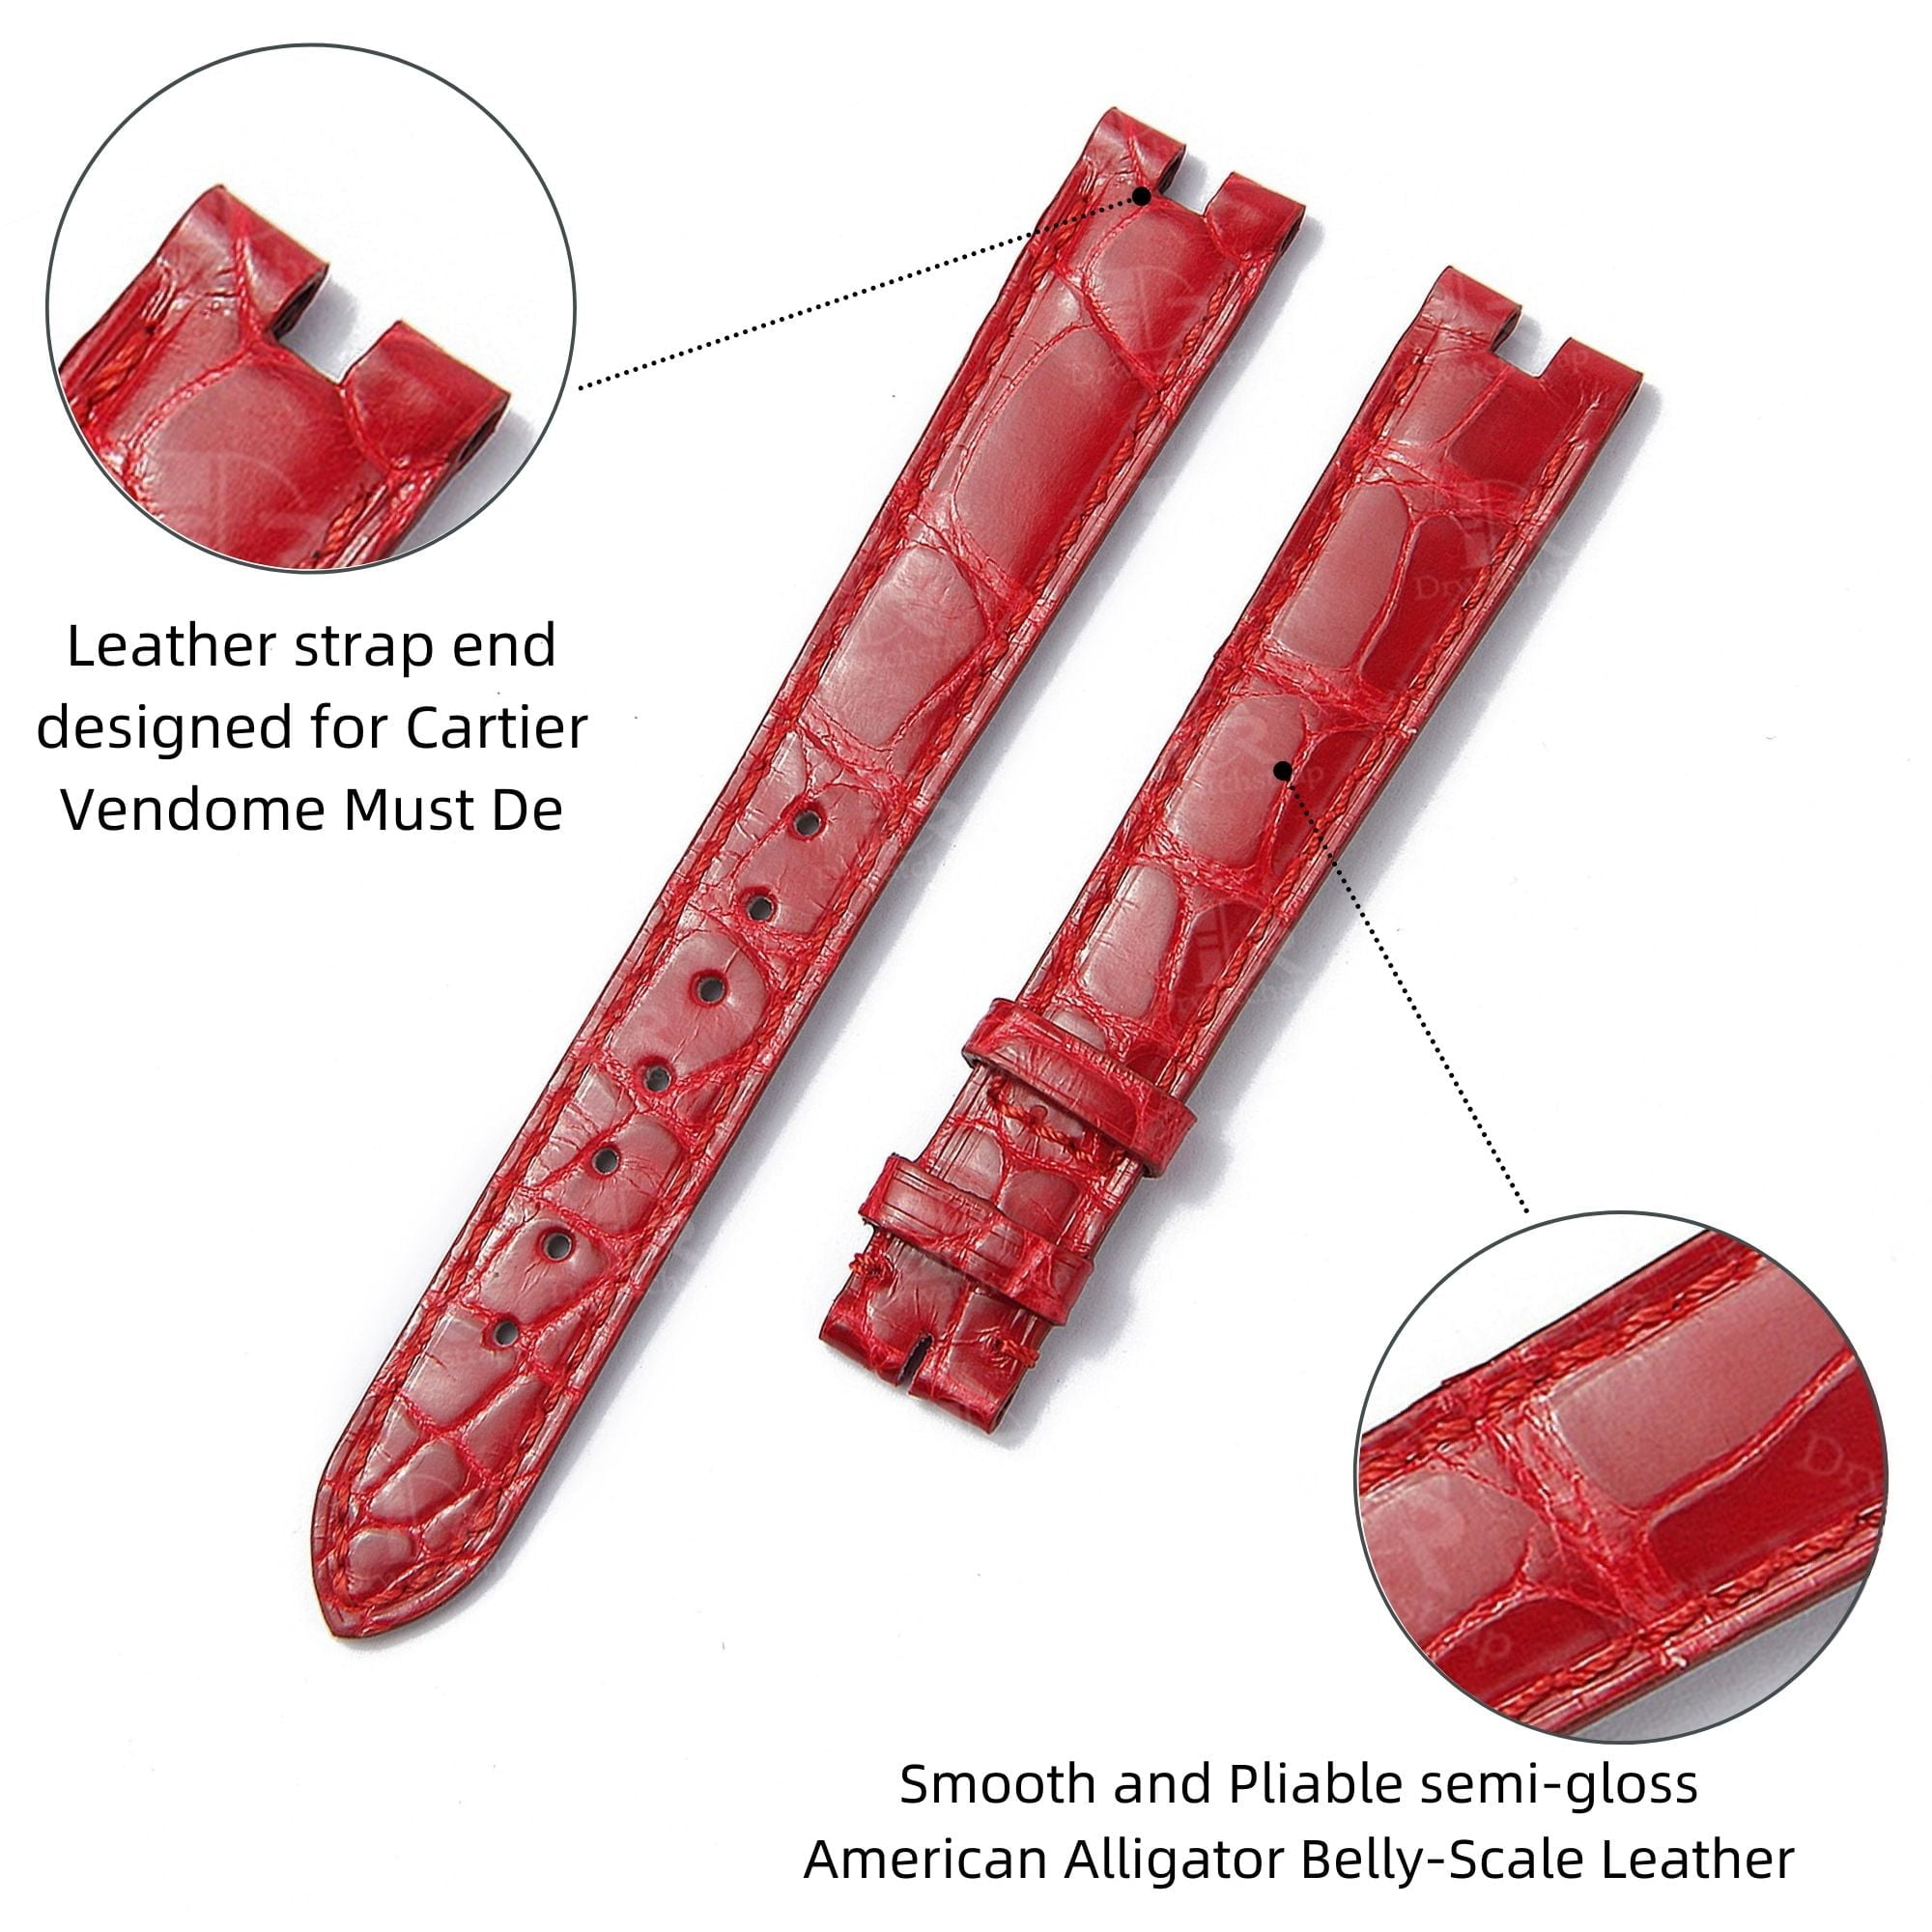 Genuine best quality American Alligator Red custom handmade replacement Cartier leather strap and watch band for Cartier Vendome Must De watch online - Shop the premium High-end crocodile material straps & watch bands from dr Watchstrap at a low price